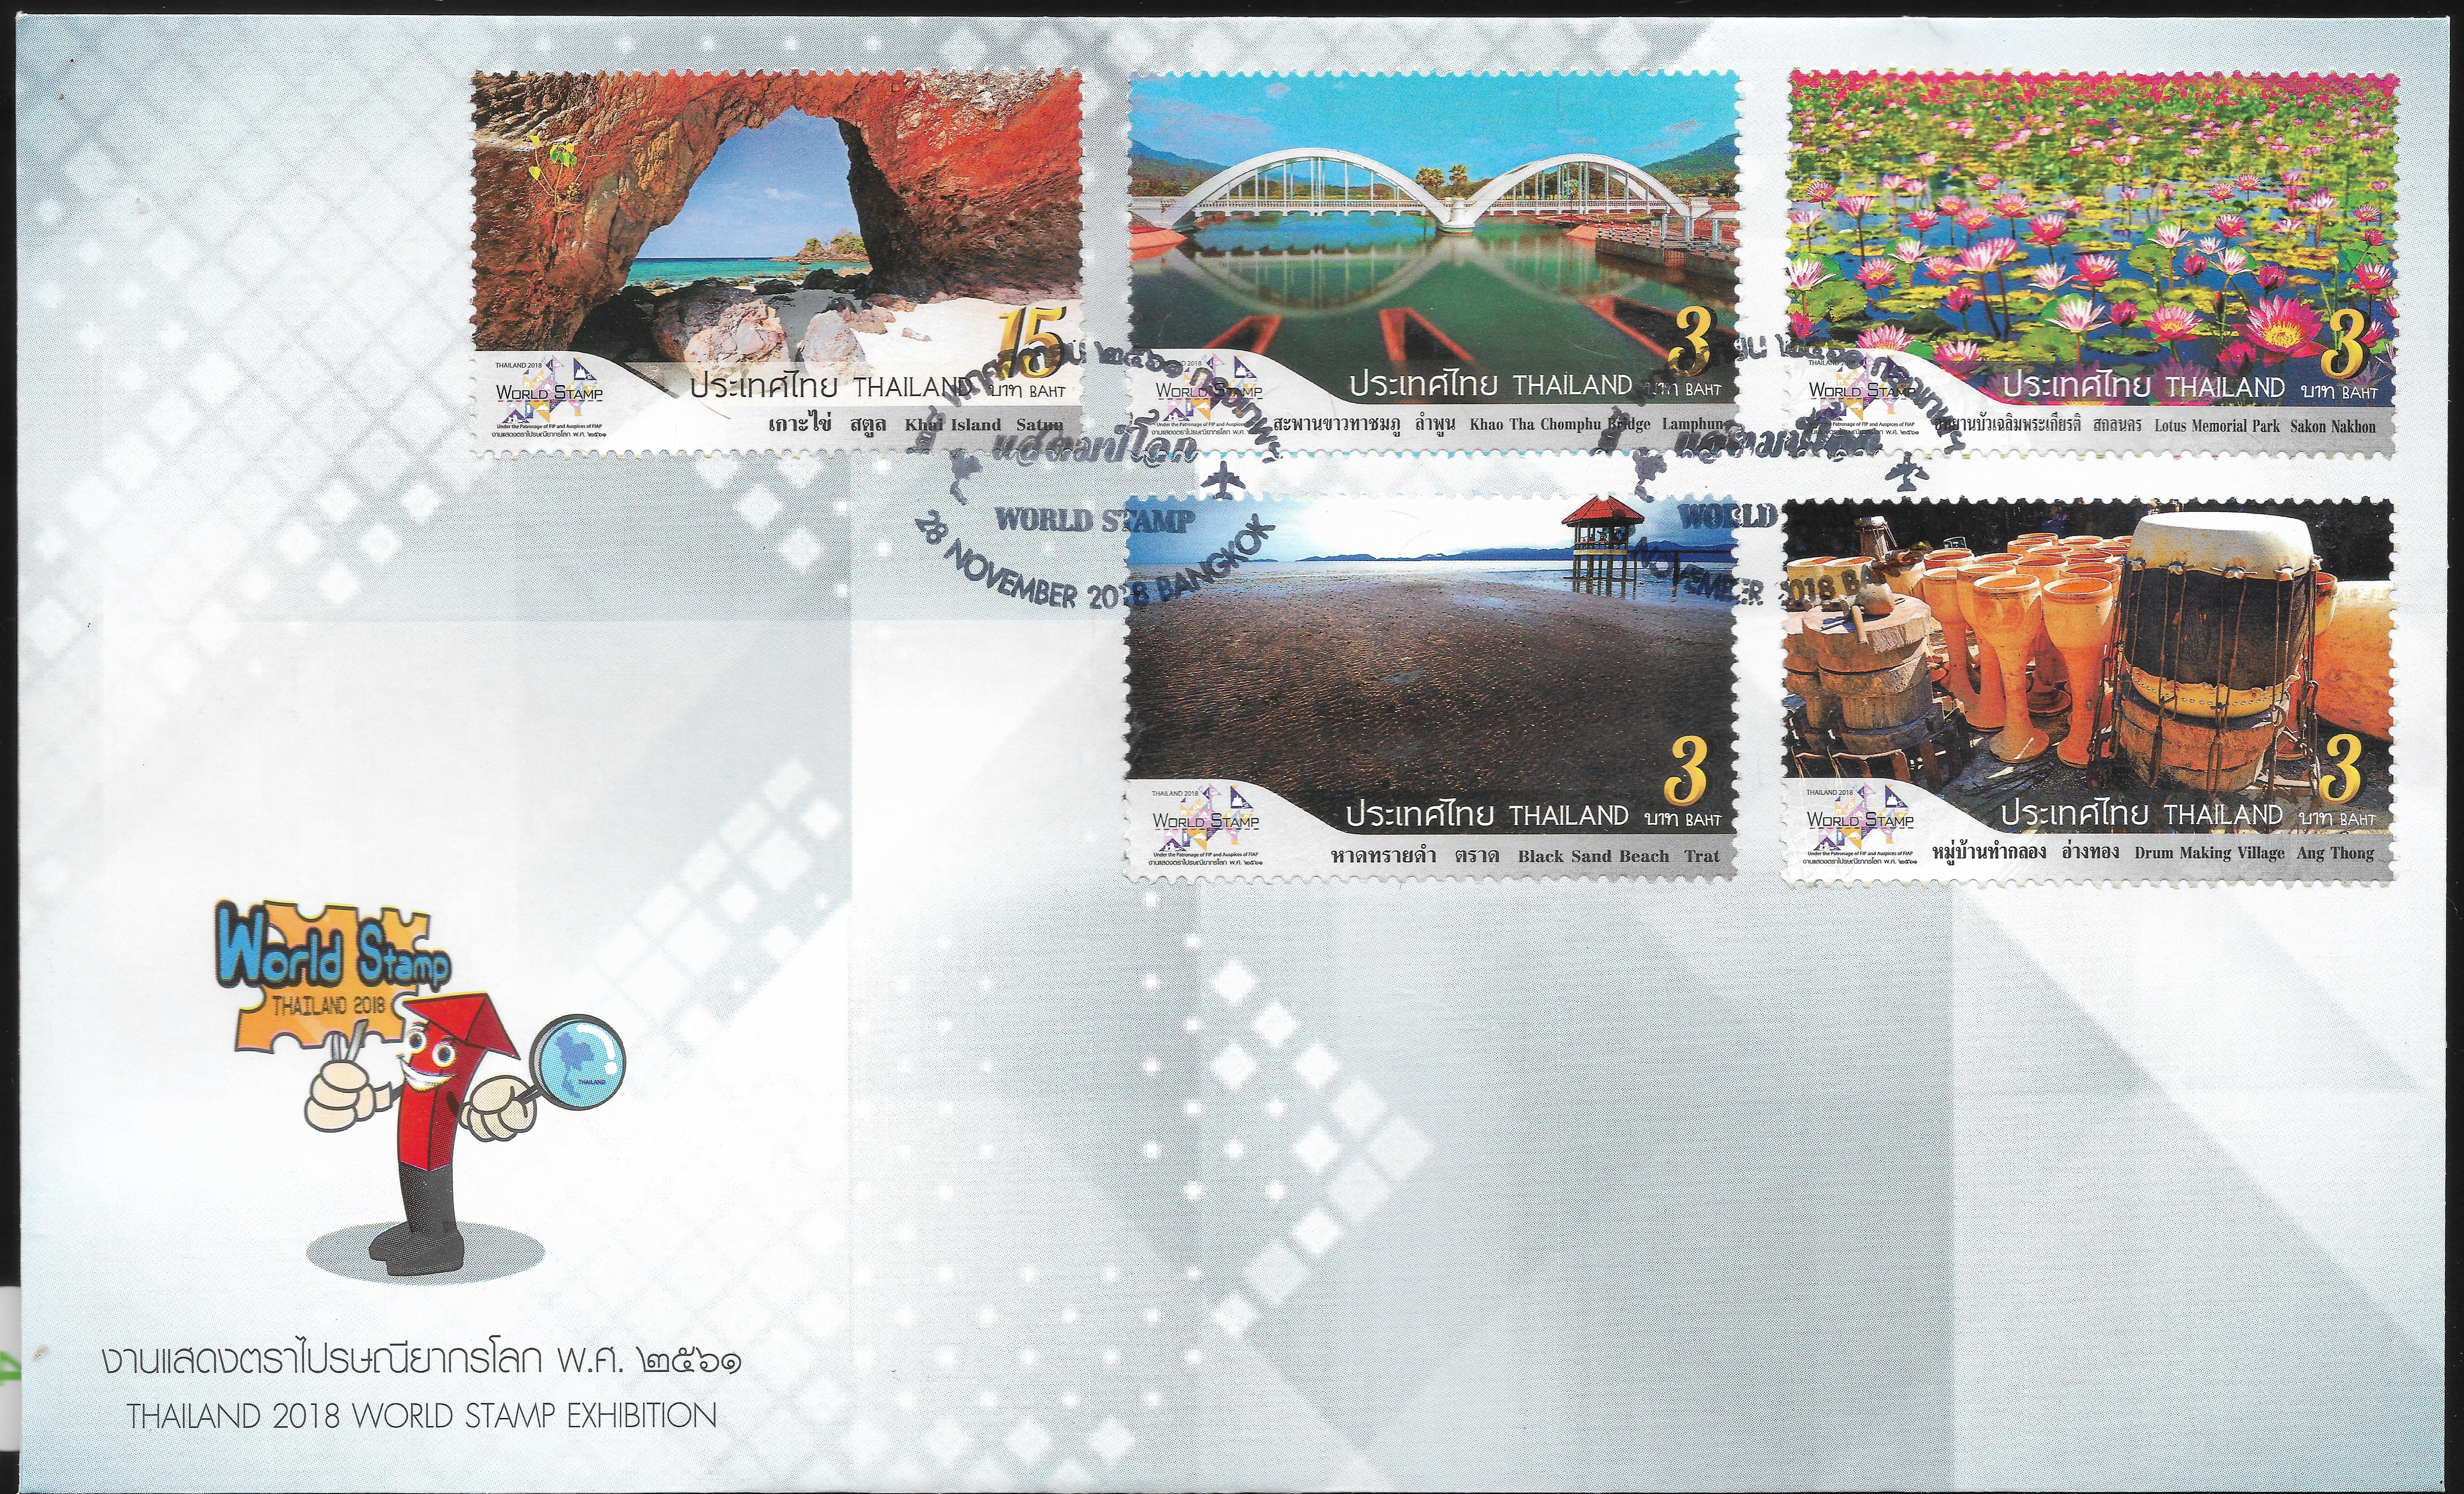 Thailand - Thailand Post #TH1158 (2018) first day cover - released November 28, 2018